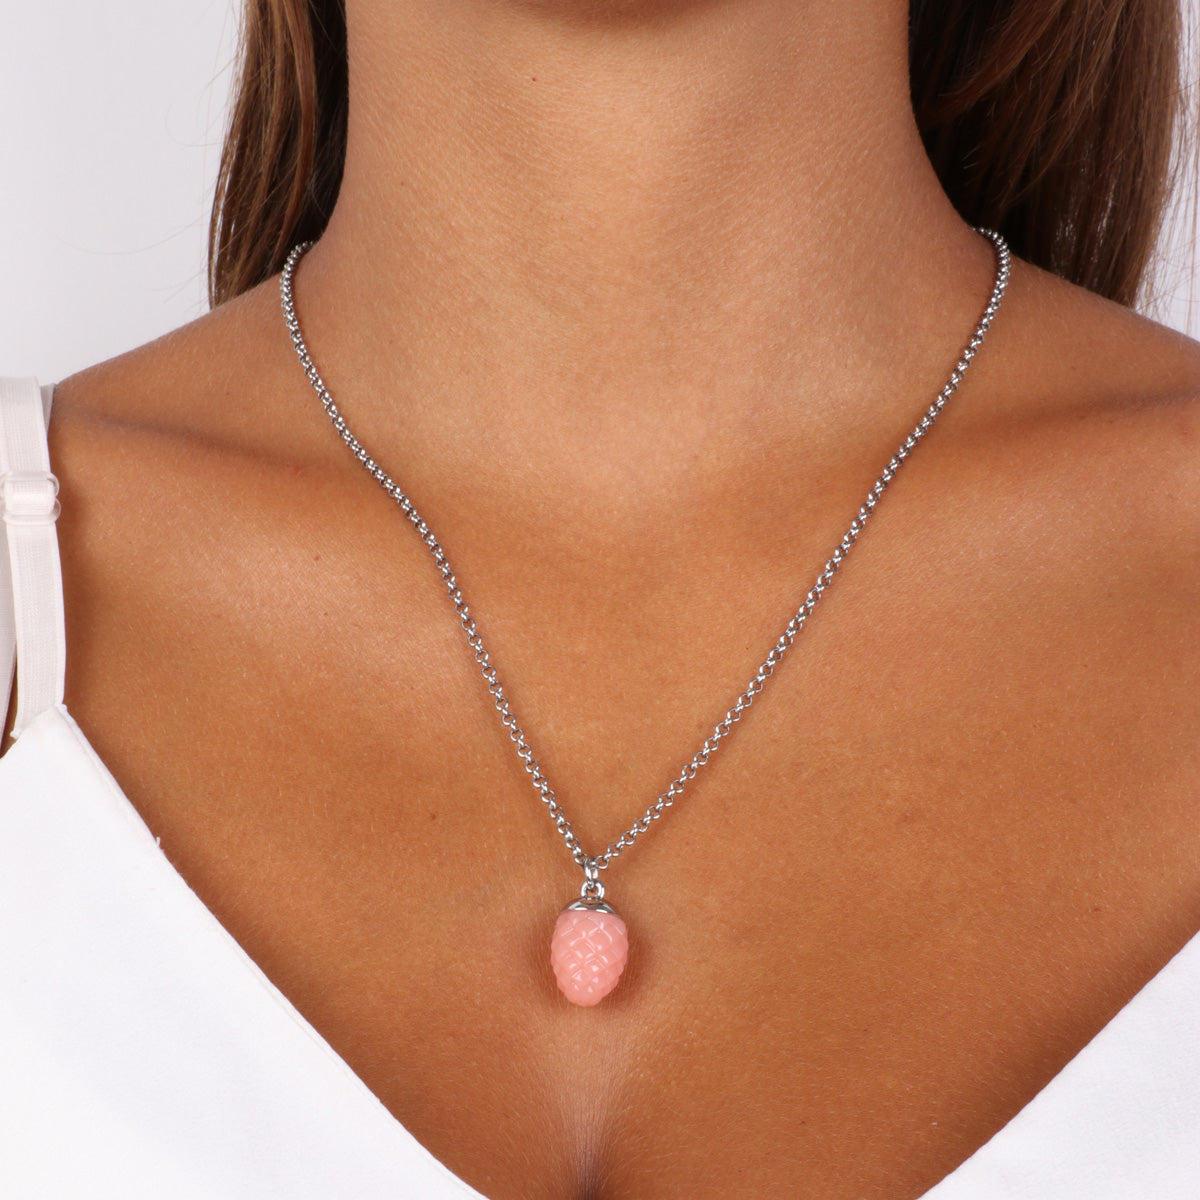 Metal necklace with pink charming pine -shaped pendant